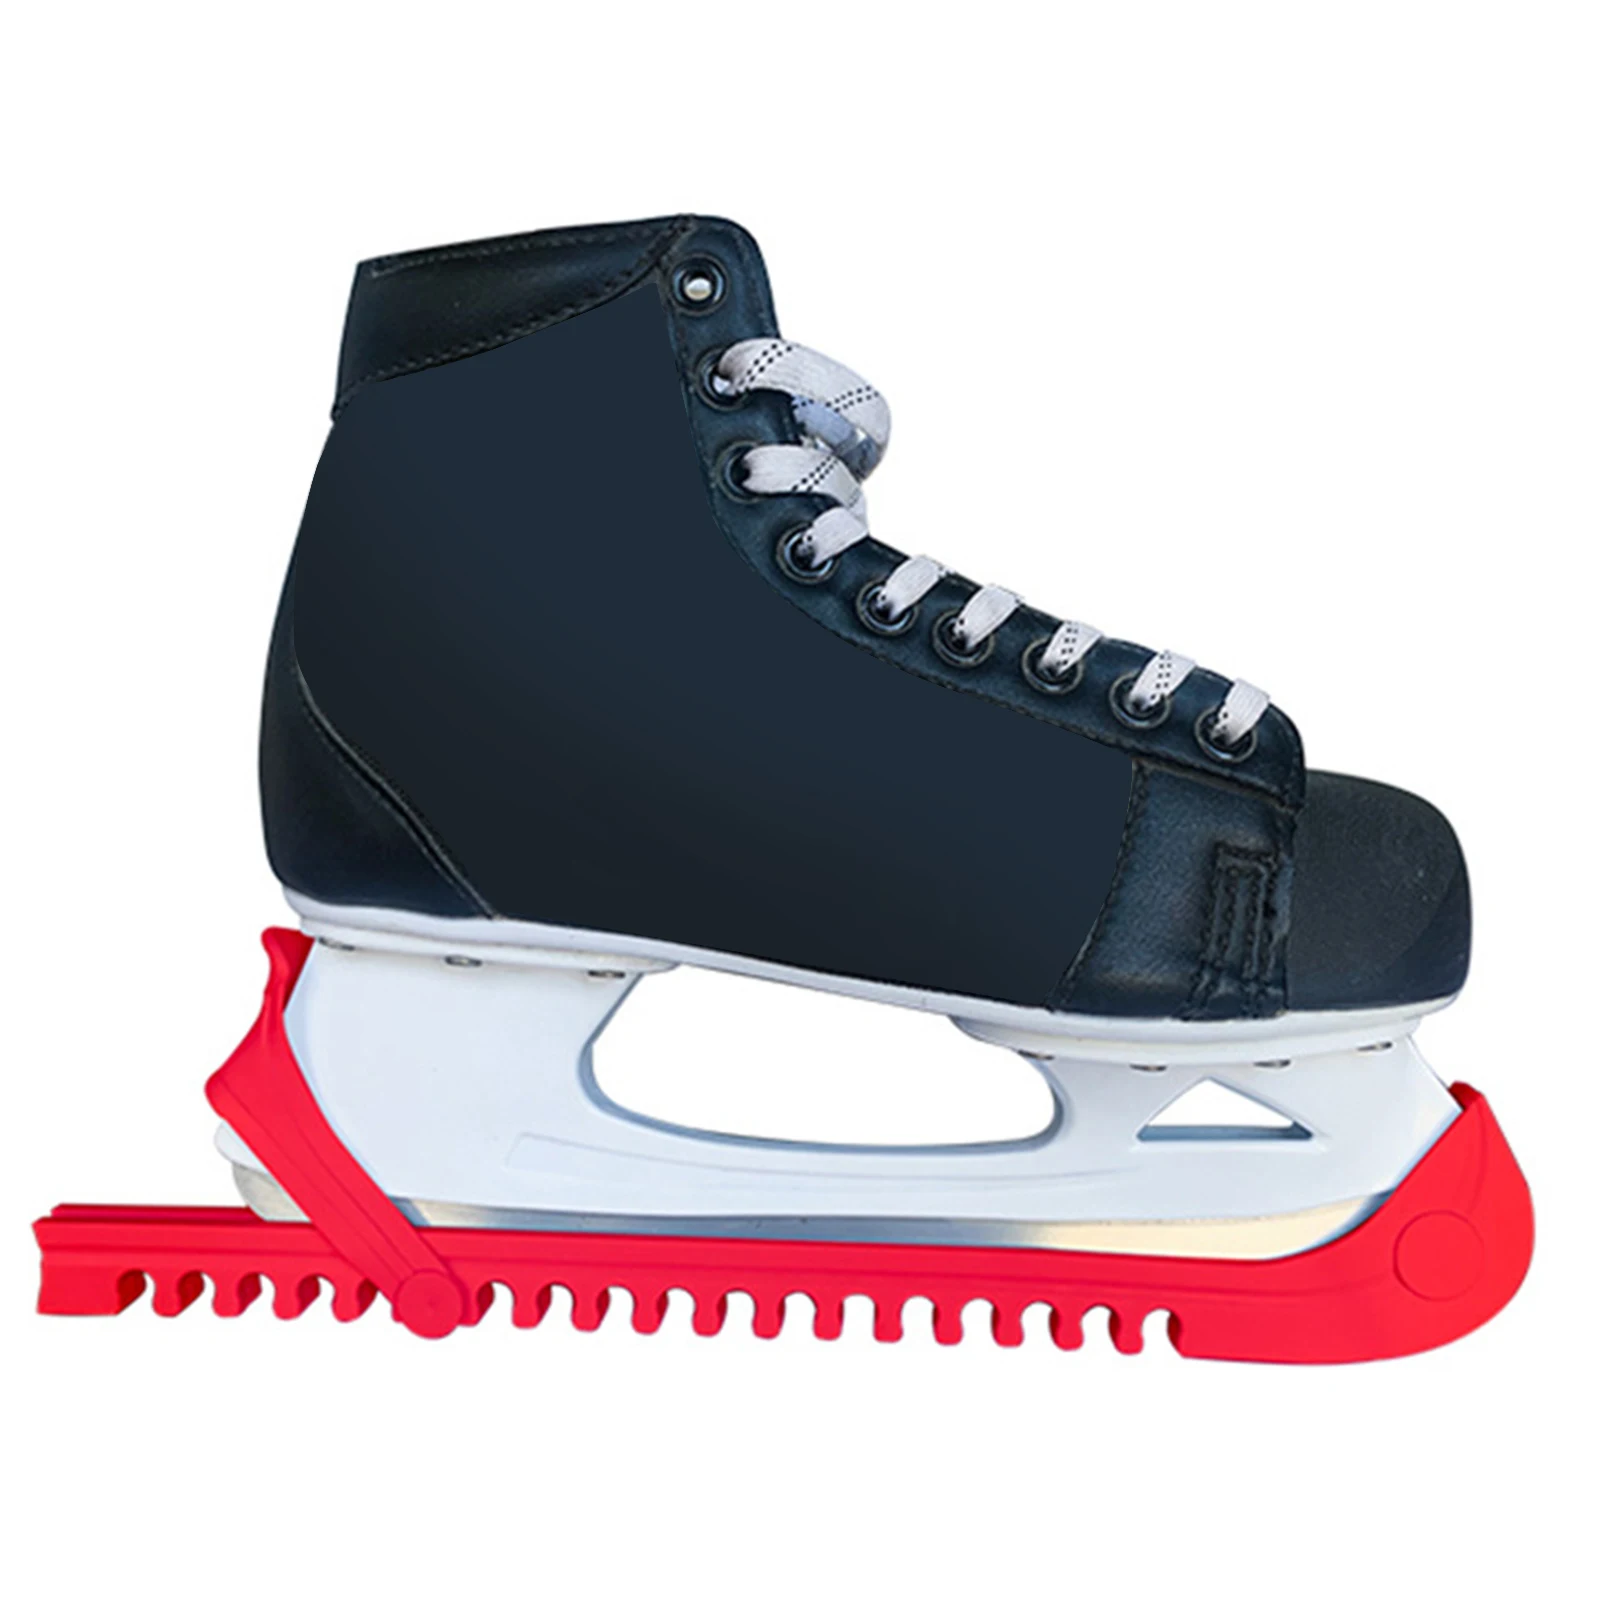 2 Pair Plastic Ice Hockey Figure Skate Walking Blade Guard Protective Cover 